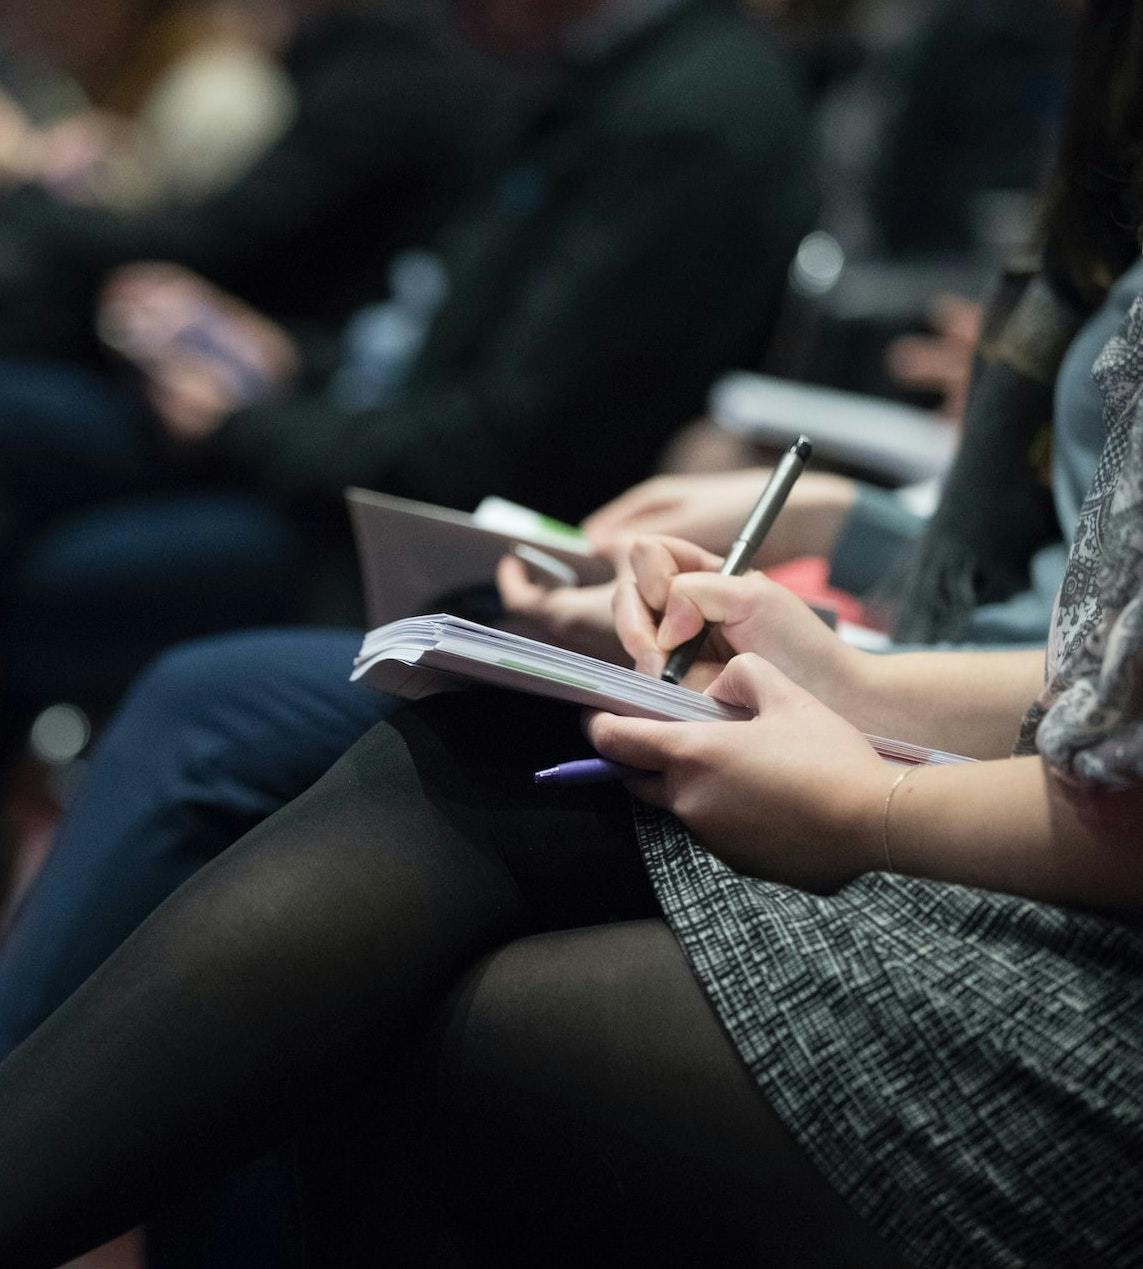 Attendee takes notes at a conference